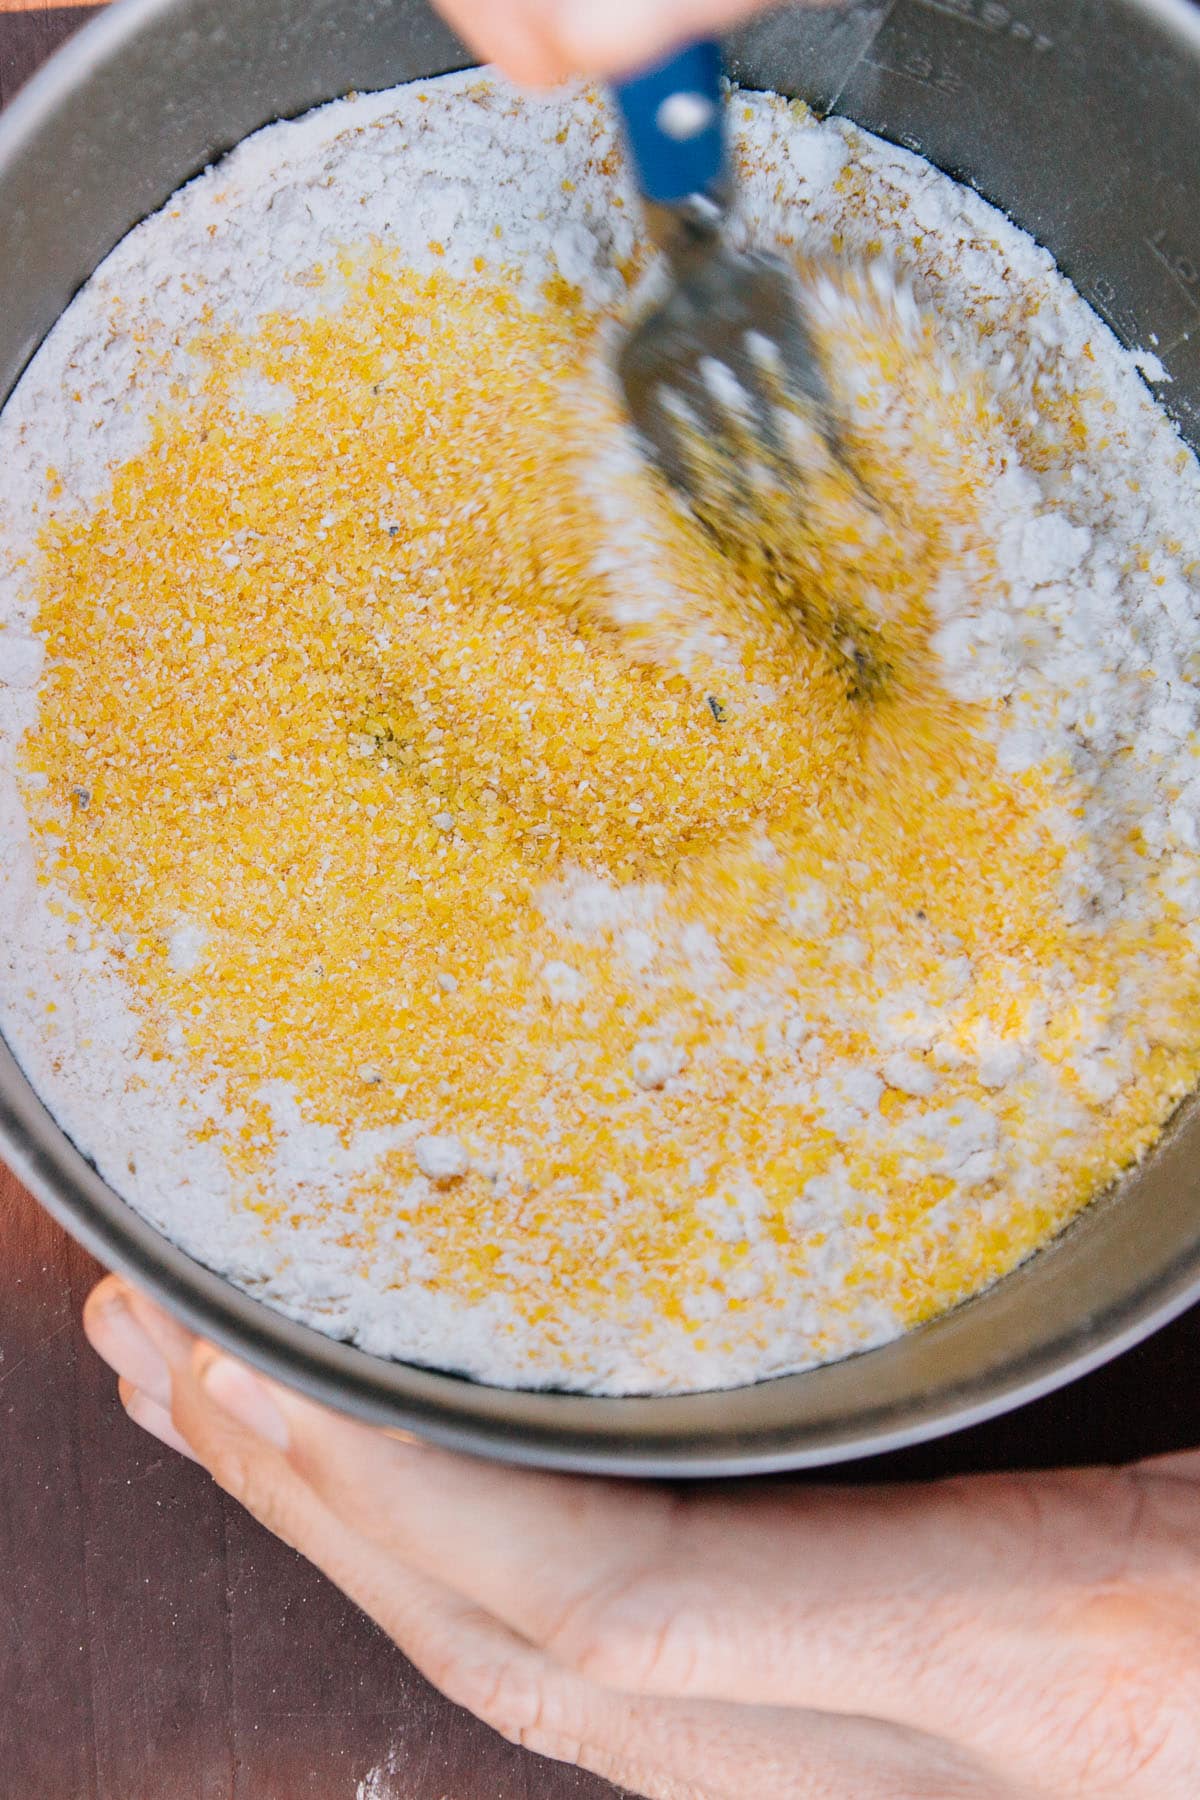 Michael mixing dry ingredients for cornbread